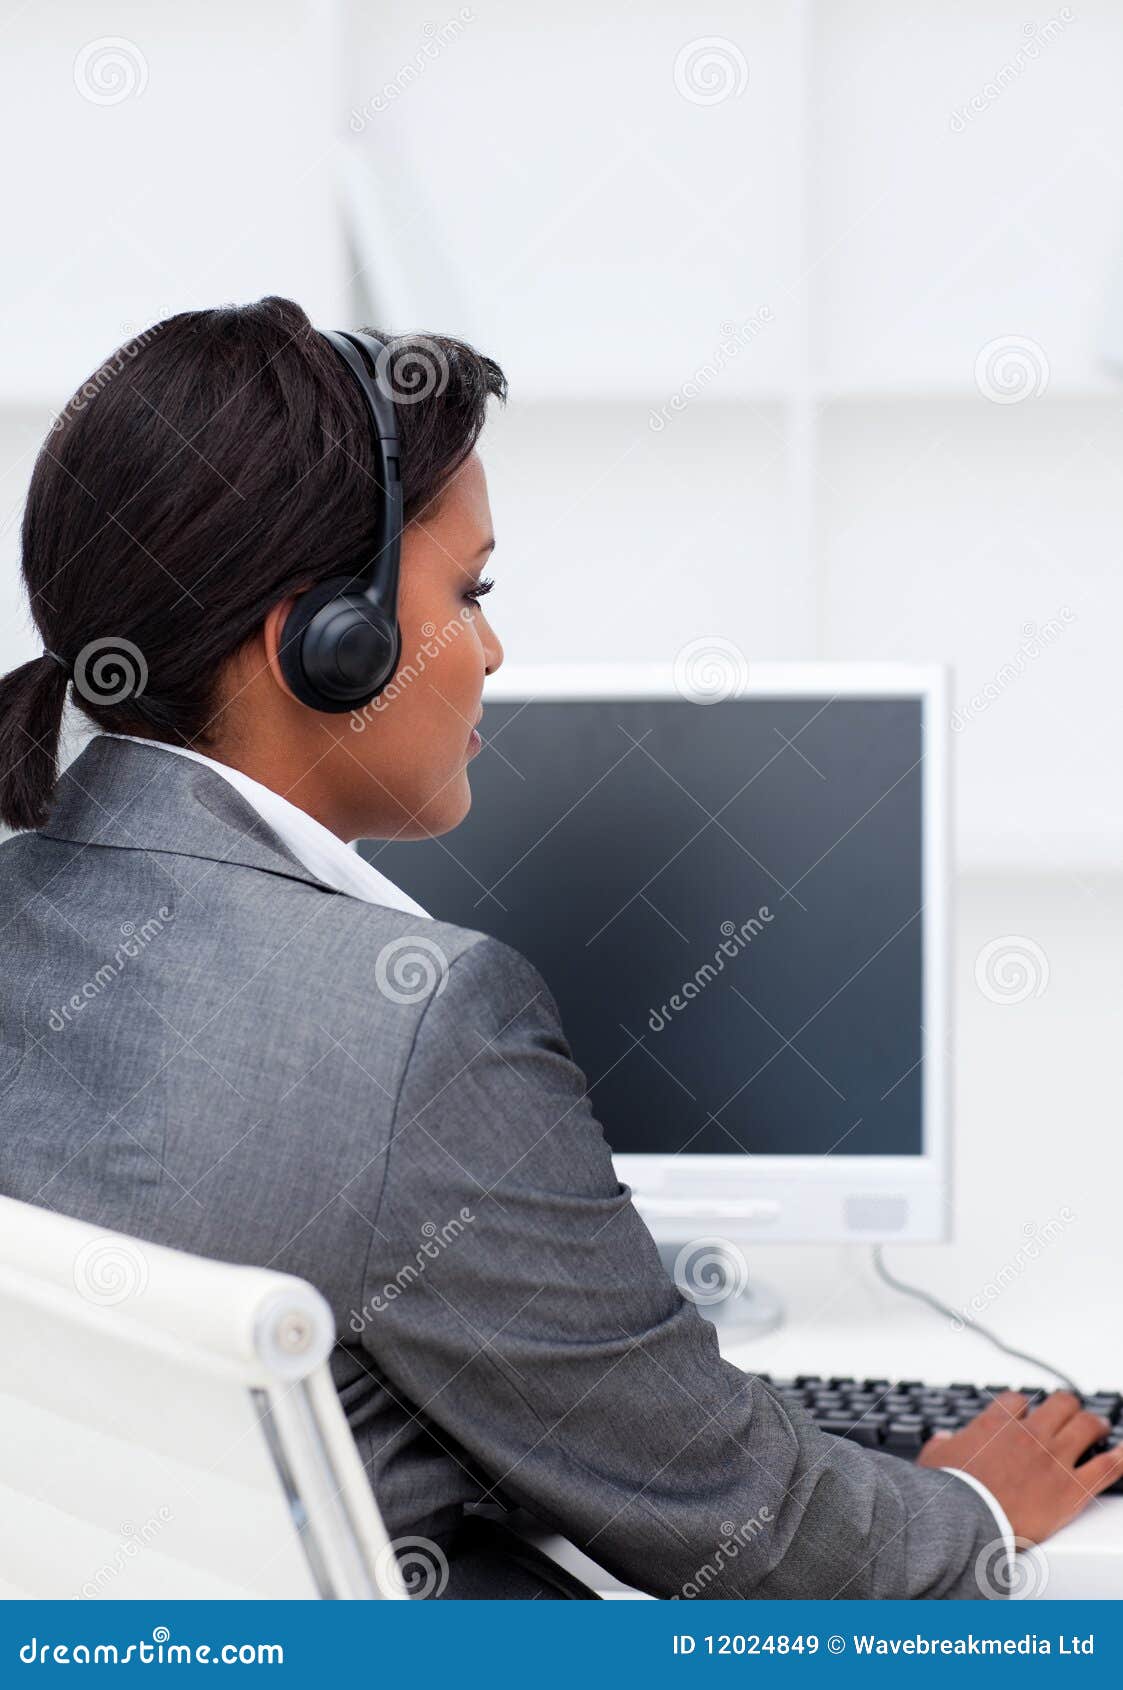 Serious businesswoman working at a computer with headset on in a call center